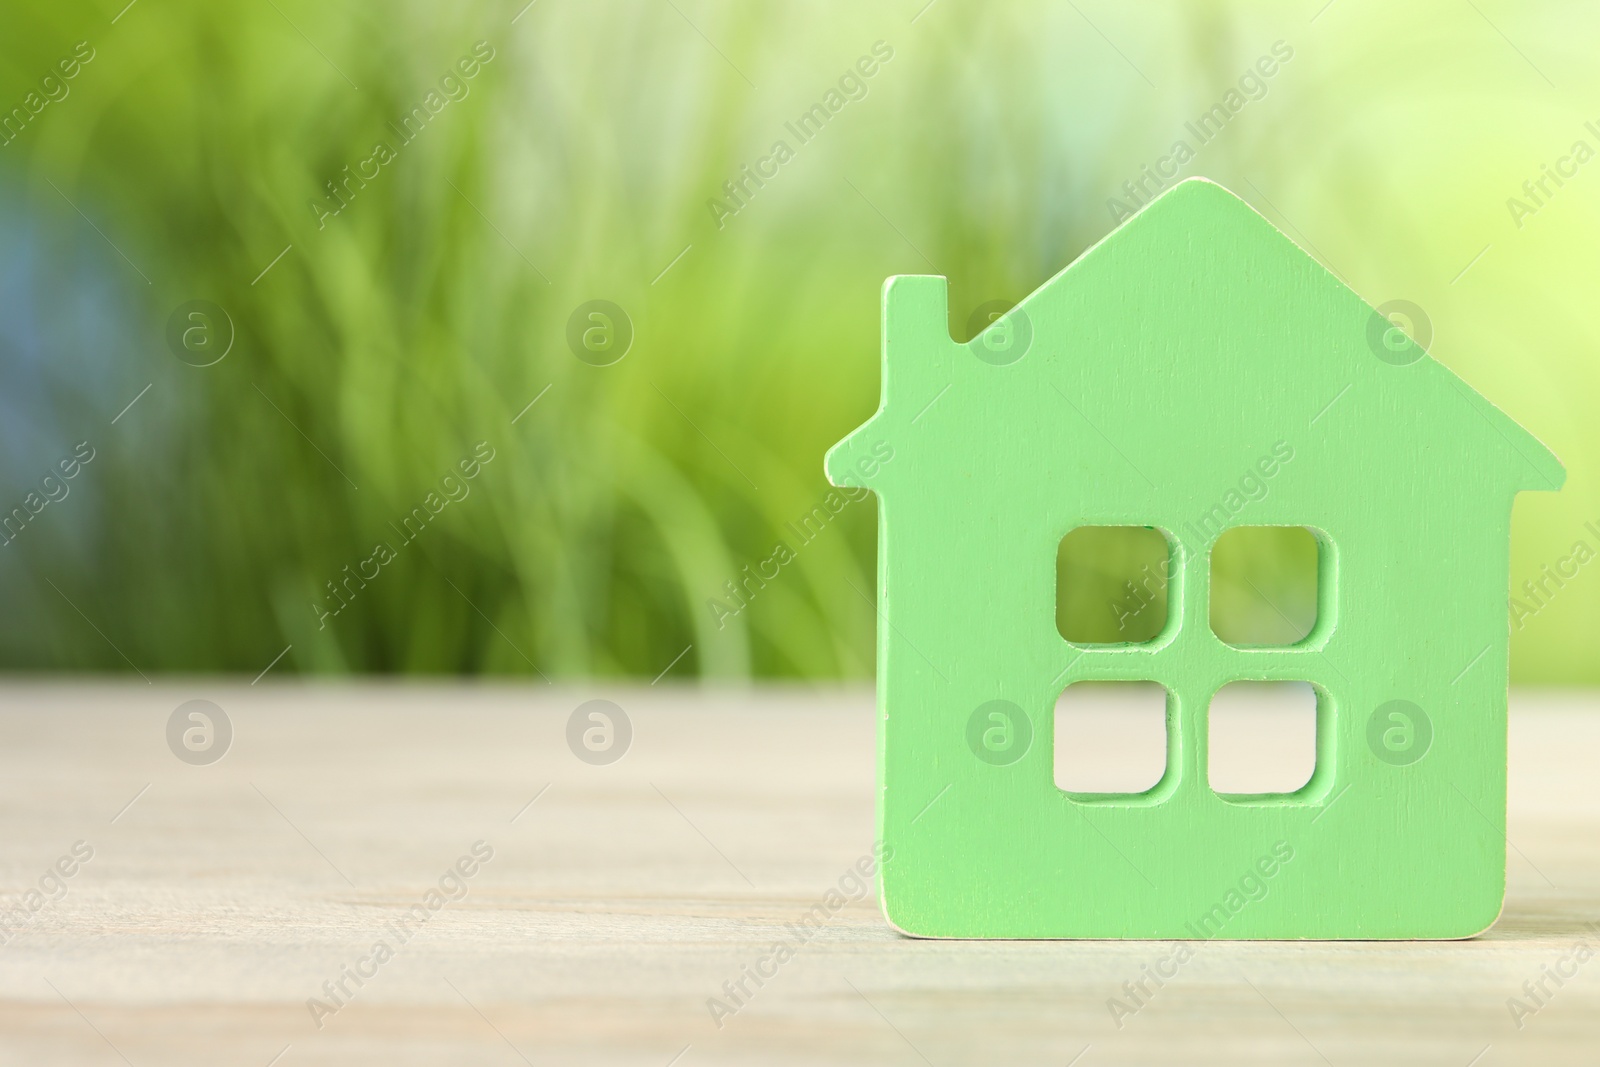 Photo of Mortgage concept. House model on white wooden table against blurred green background, space for text